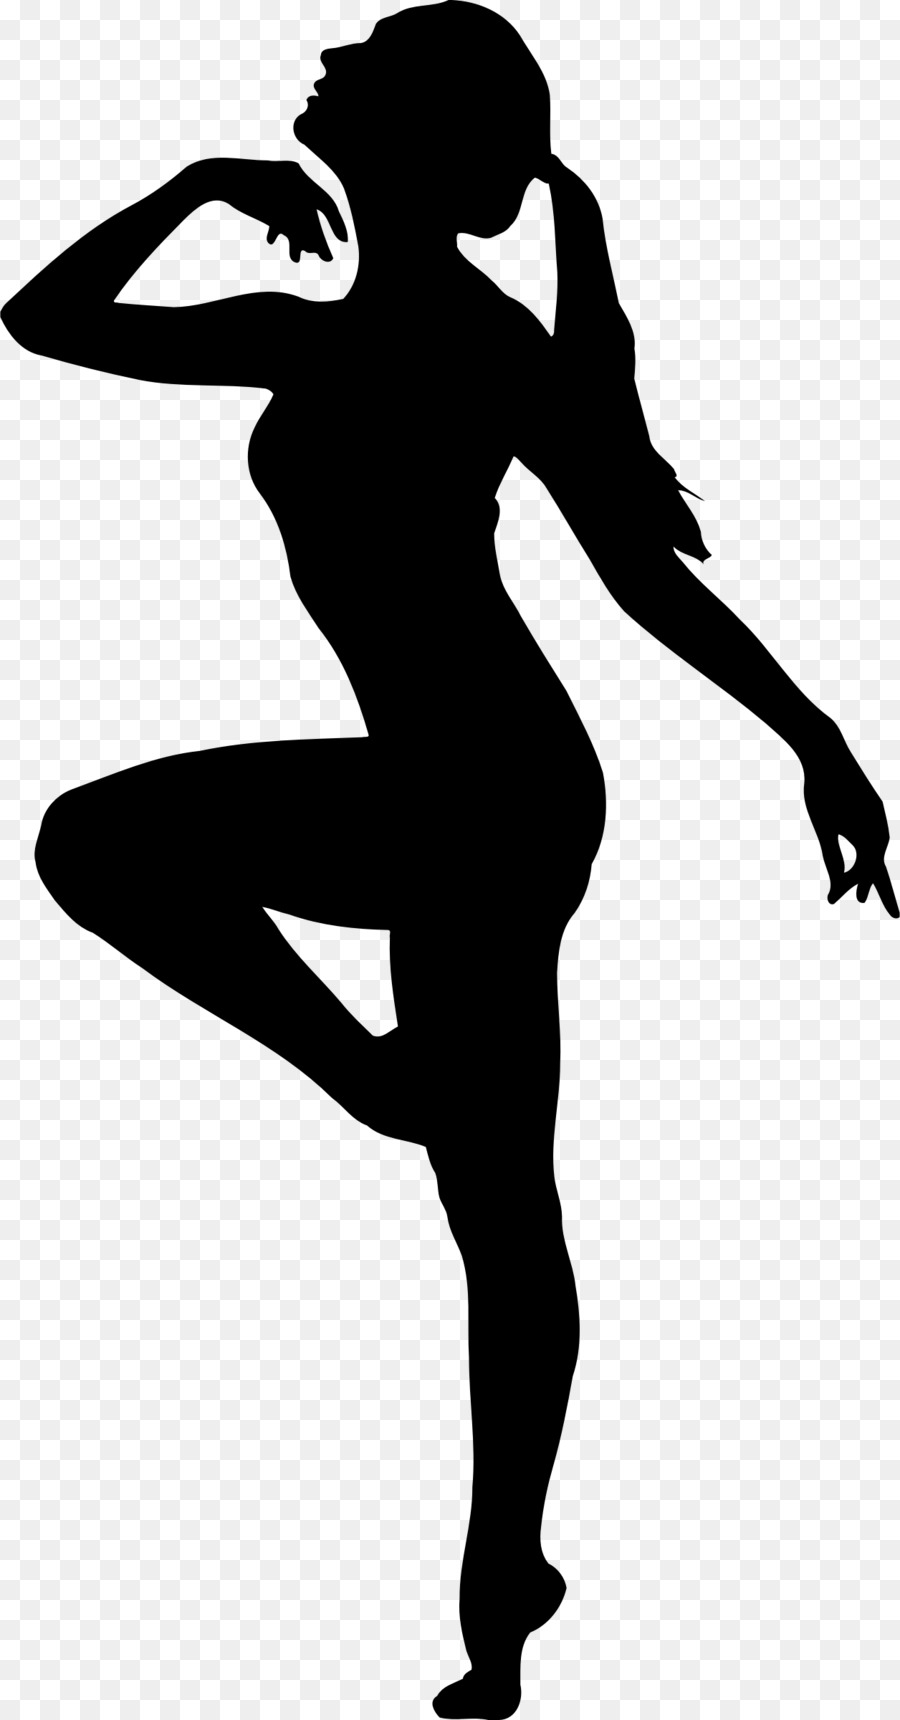 Download 35+ Dancers Silhouette Svg Free Gif Free SVG files ...